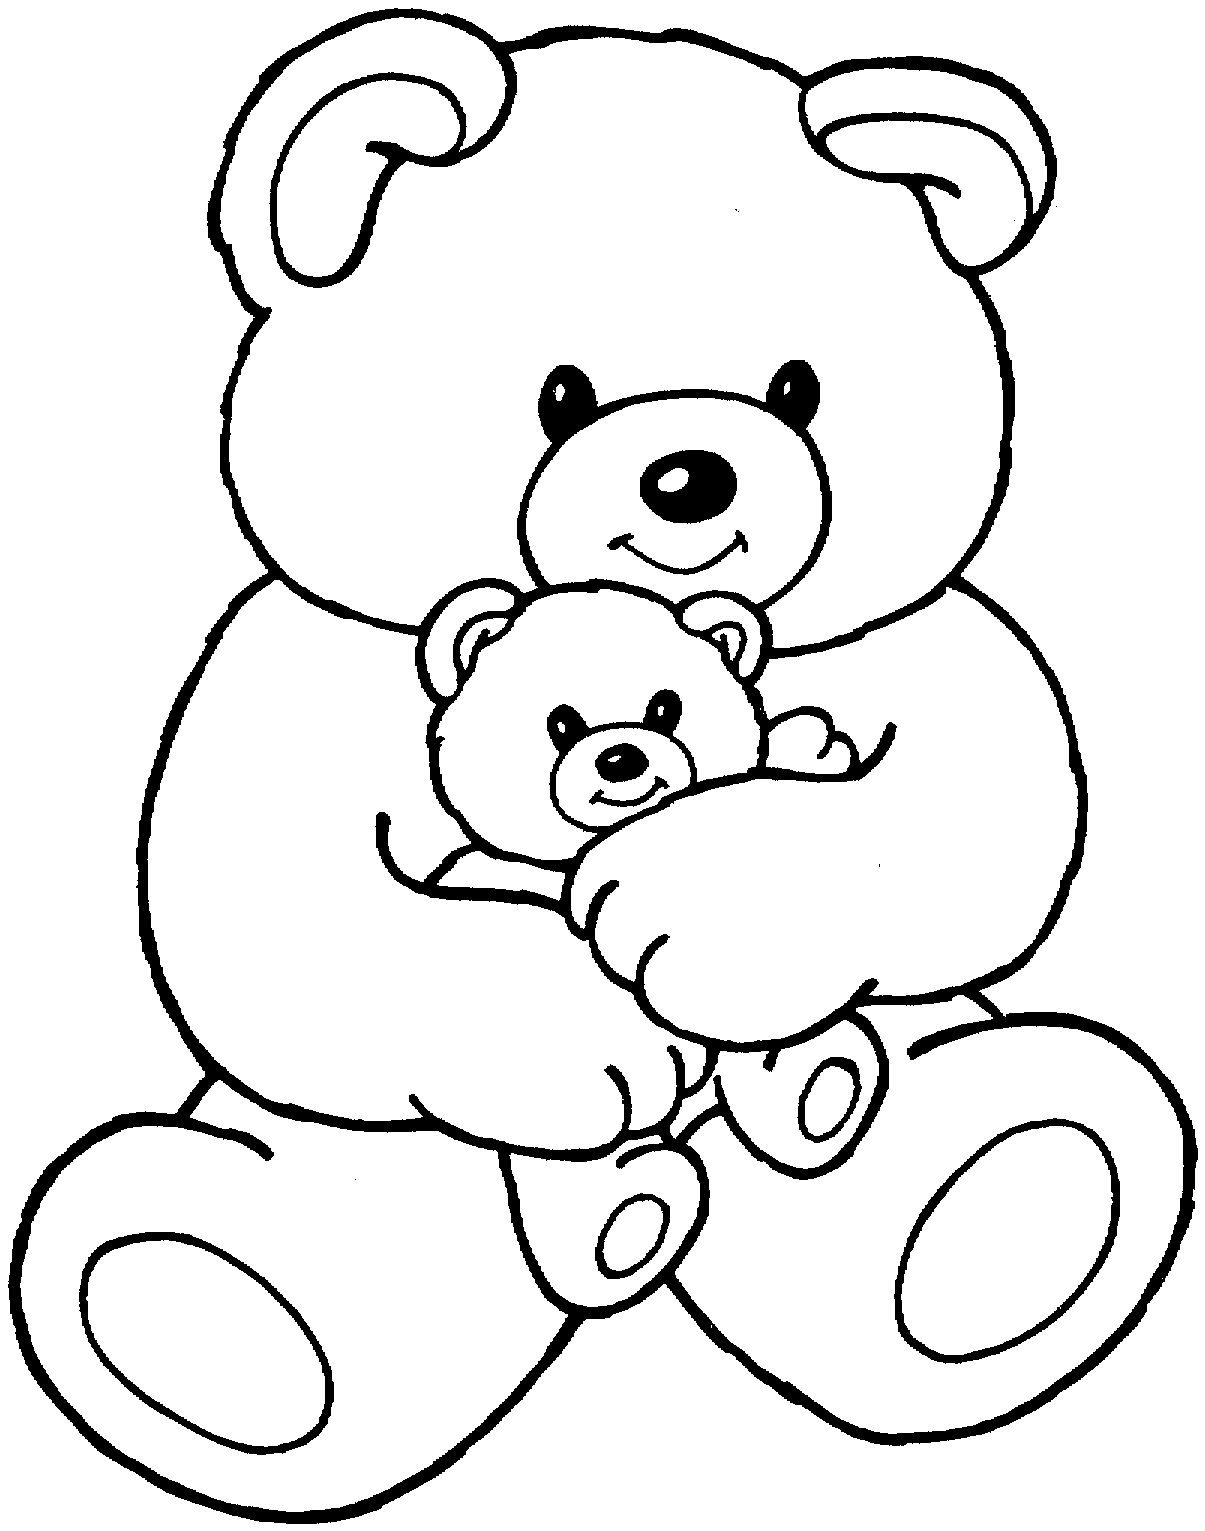 free printable bear coloring pages Free bear coloring pages | Free ...